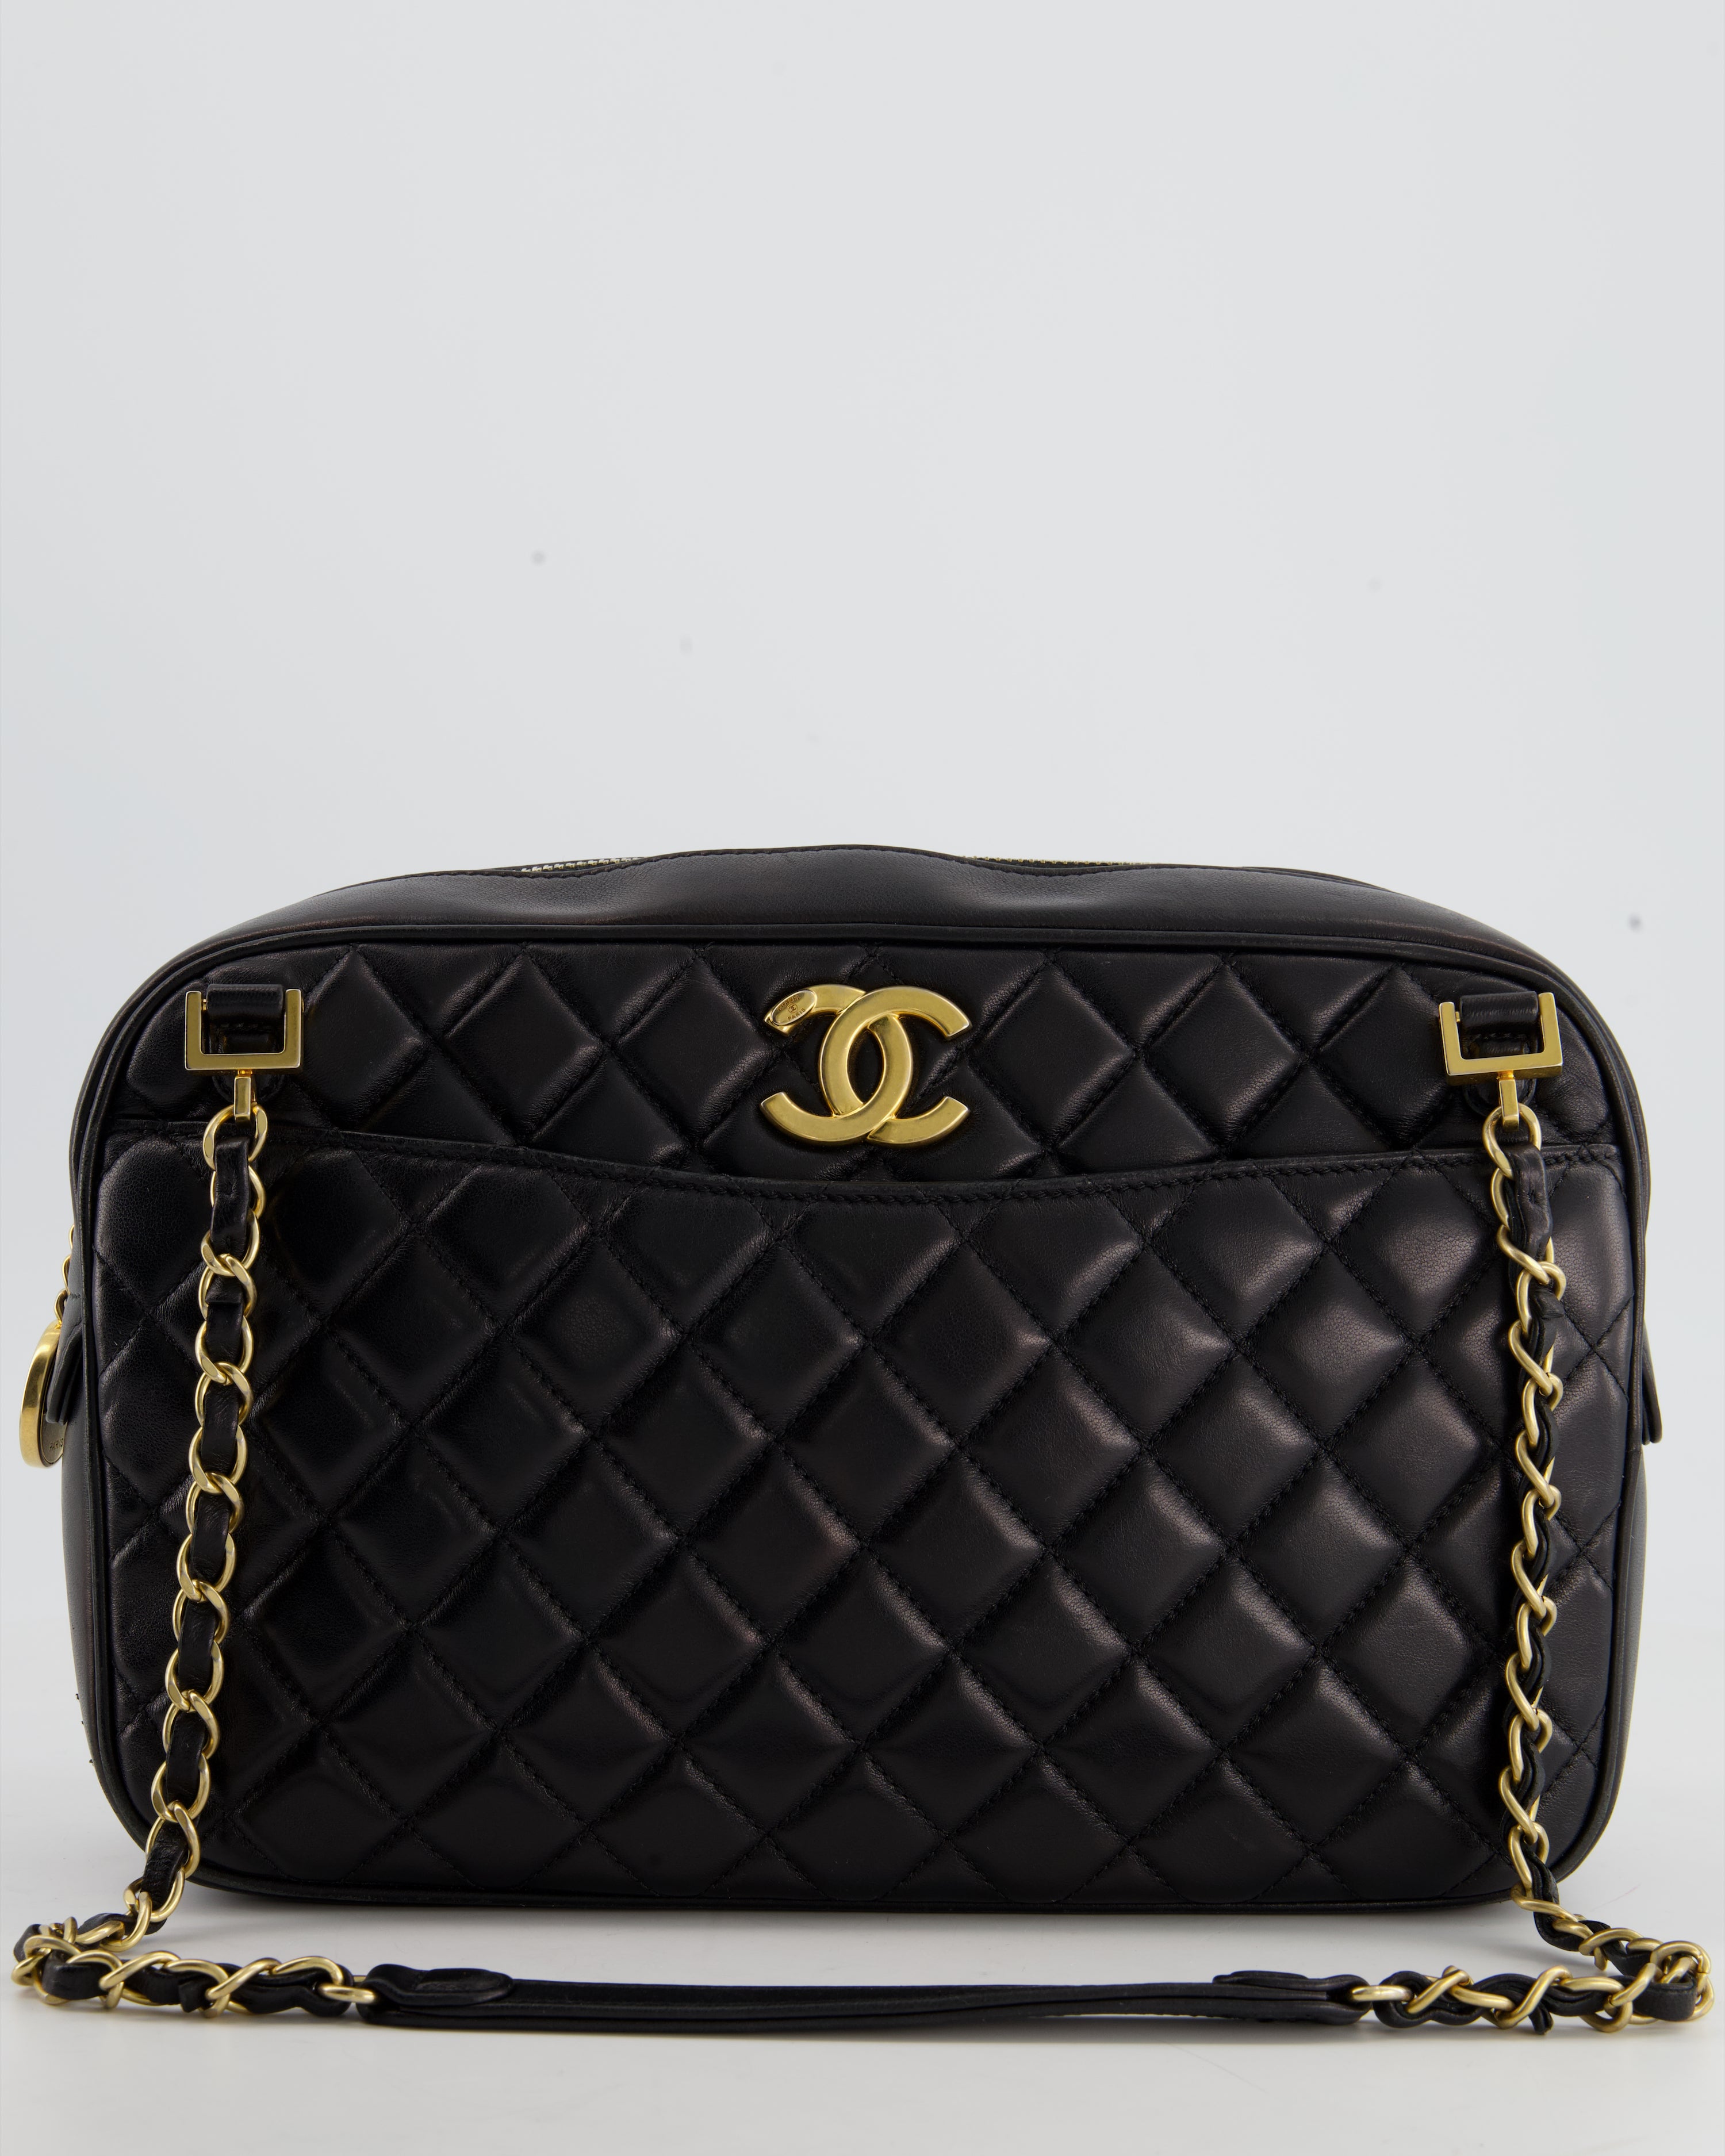 Chanel Black Crossbody Camera Bag in Quilted Lambskin With Gold